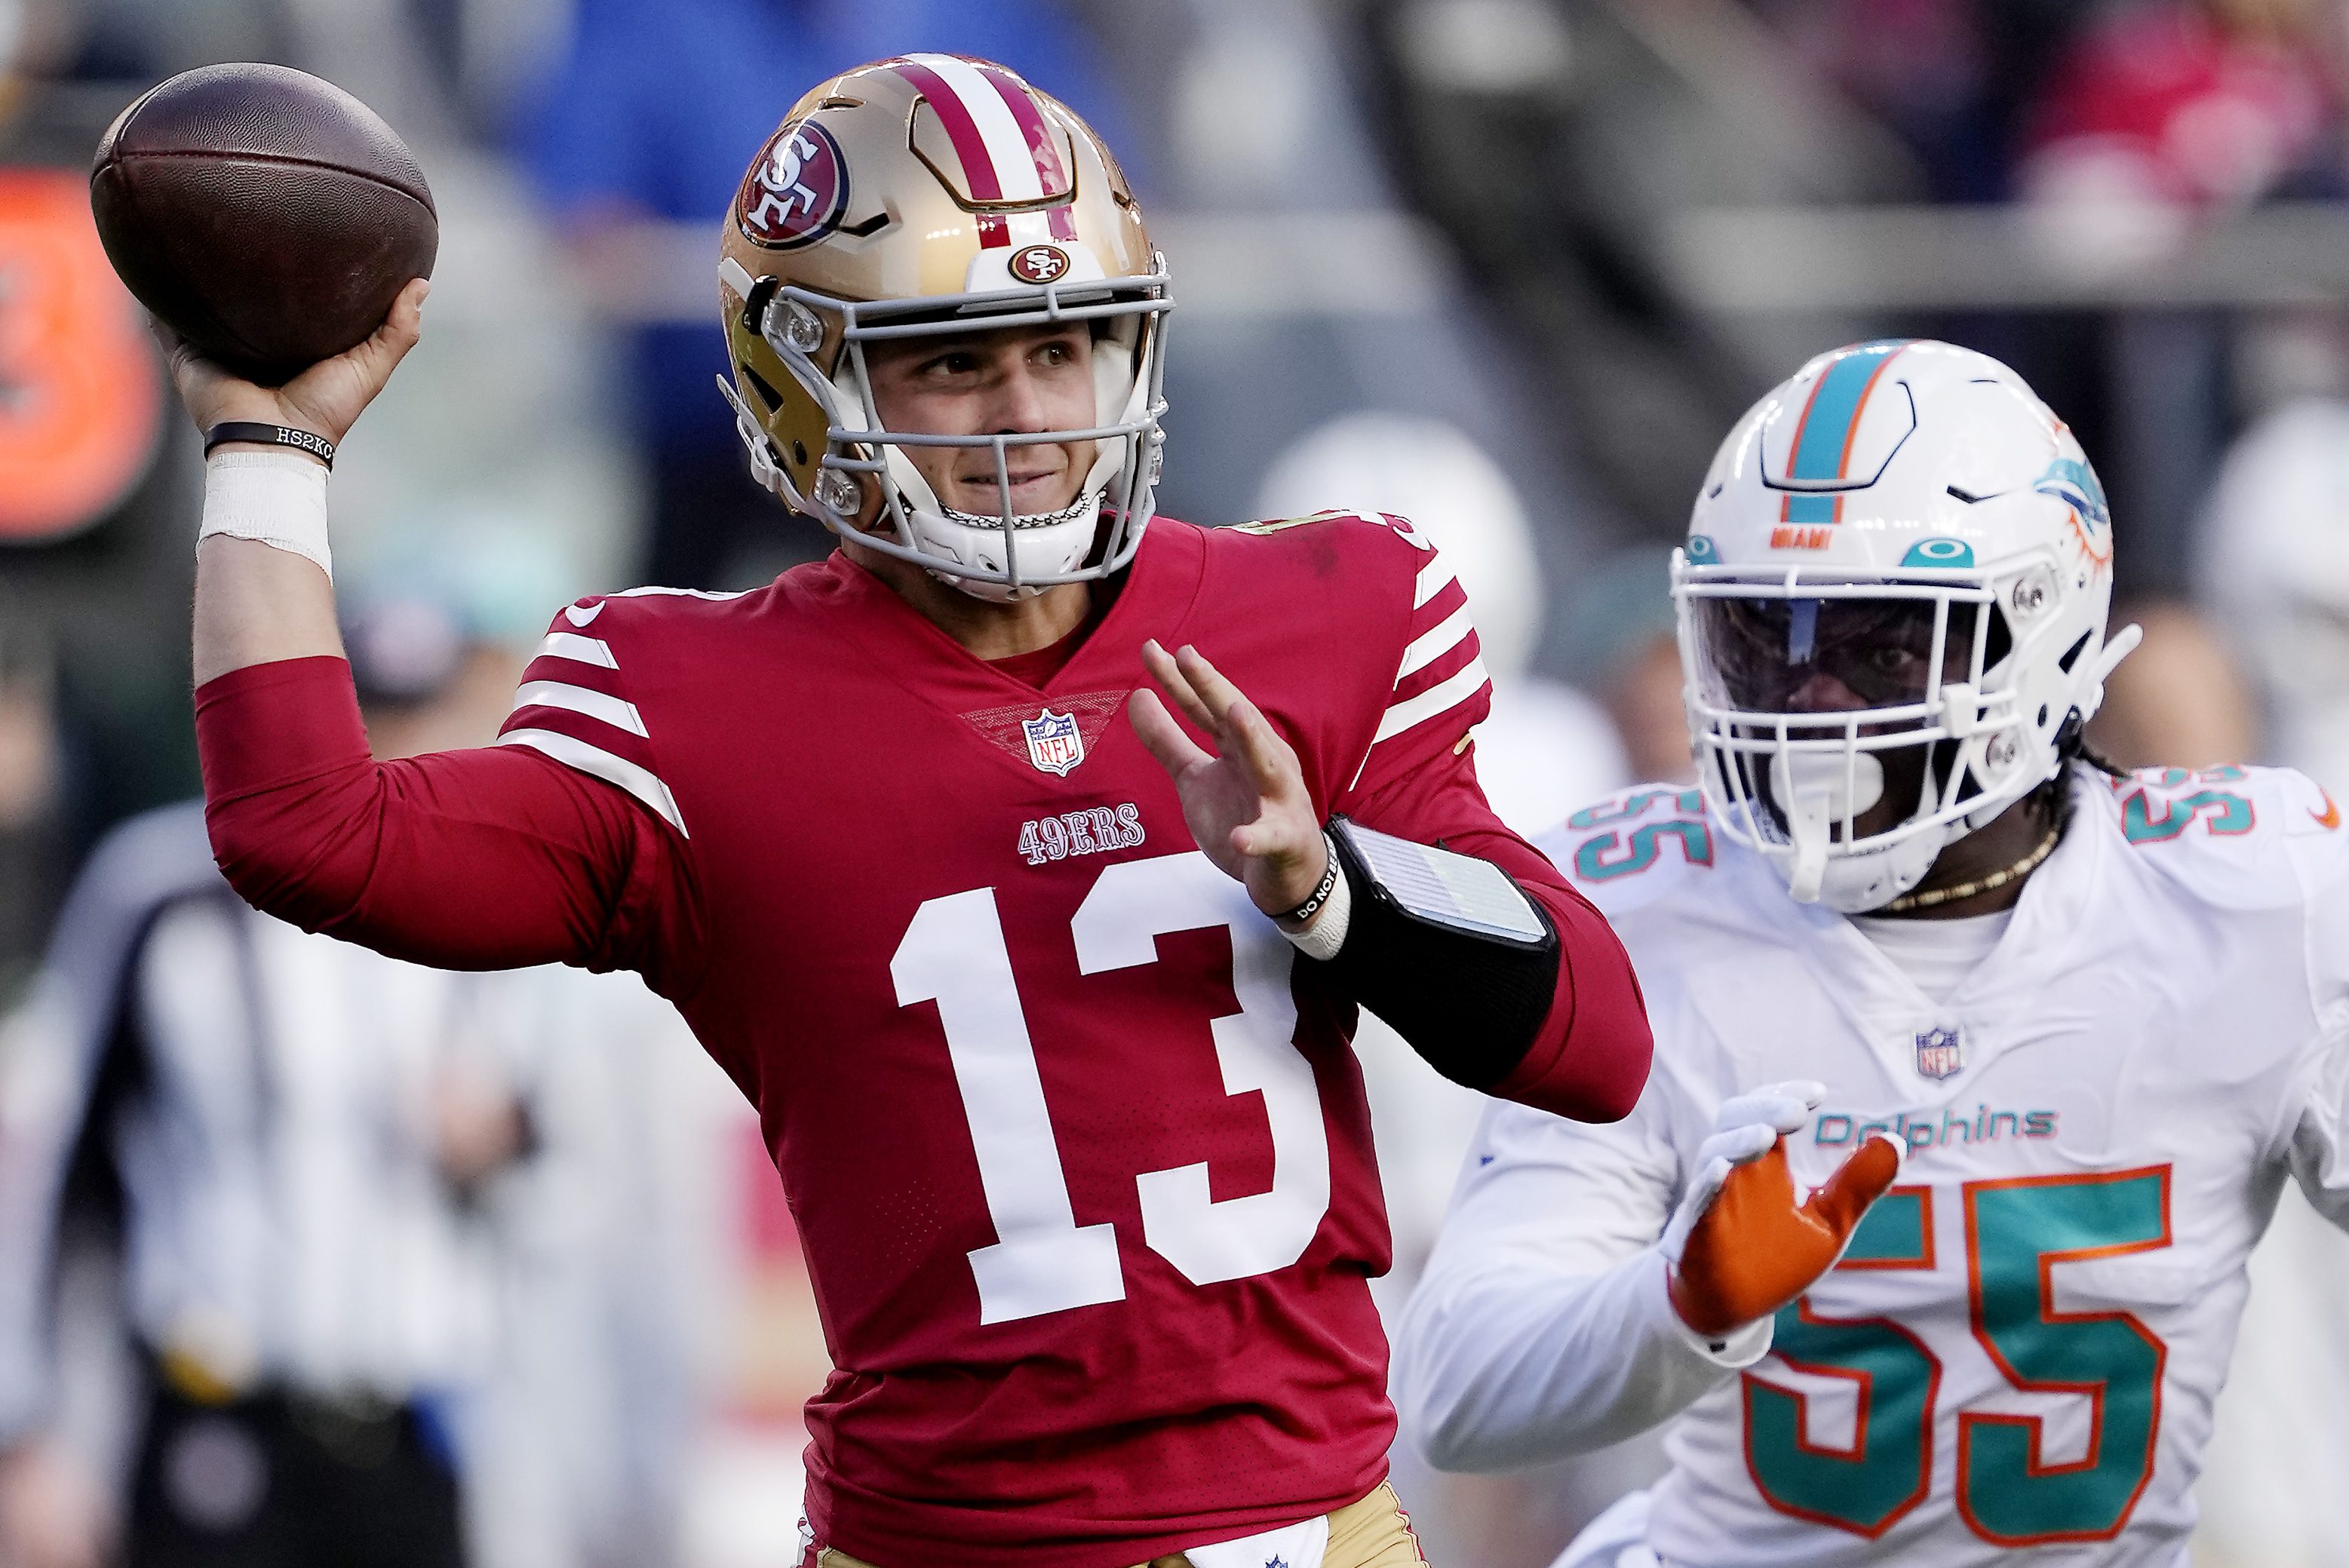 The Top Week 13 NFL Storylines Brock Purdy, Baker Mayfield and Lamar